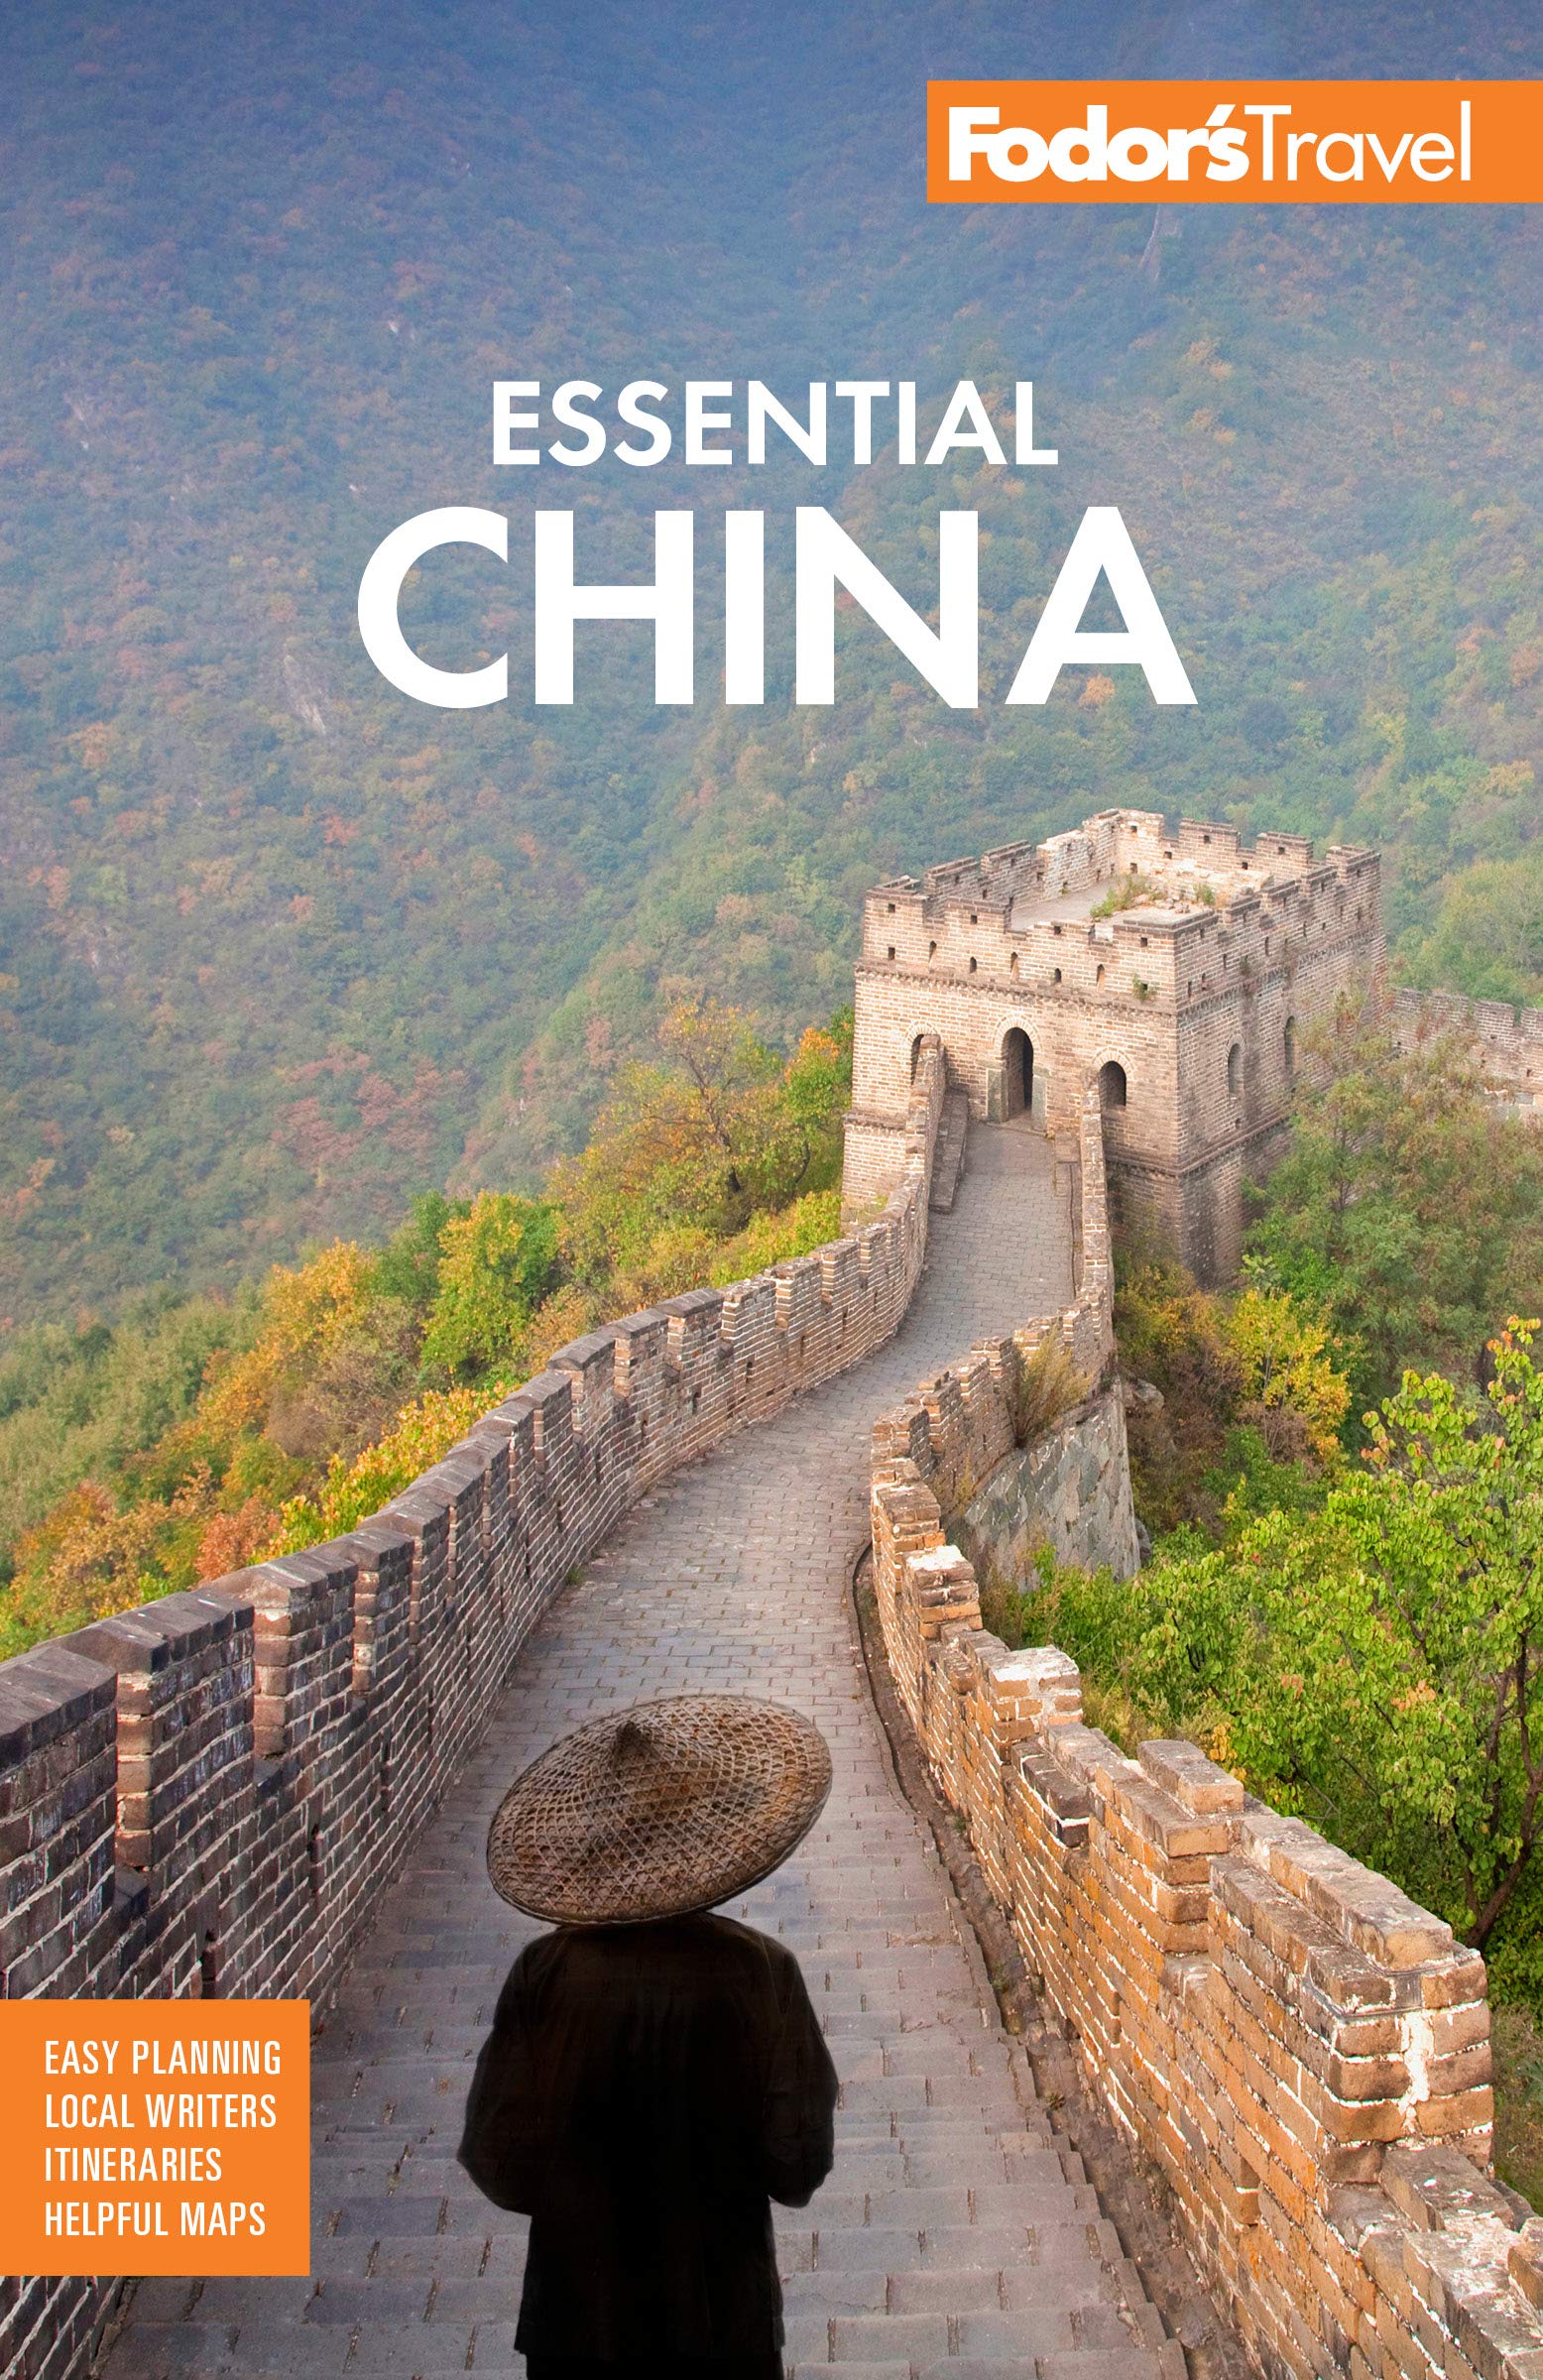 Fodor's Essential China (Full-color Travel Guide)